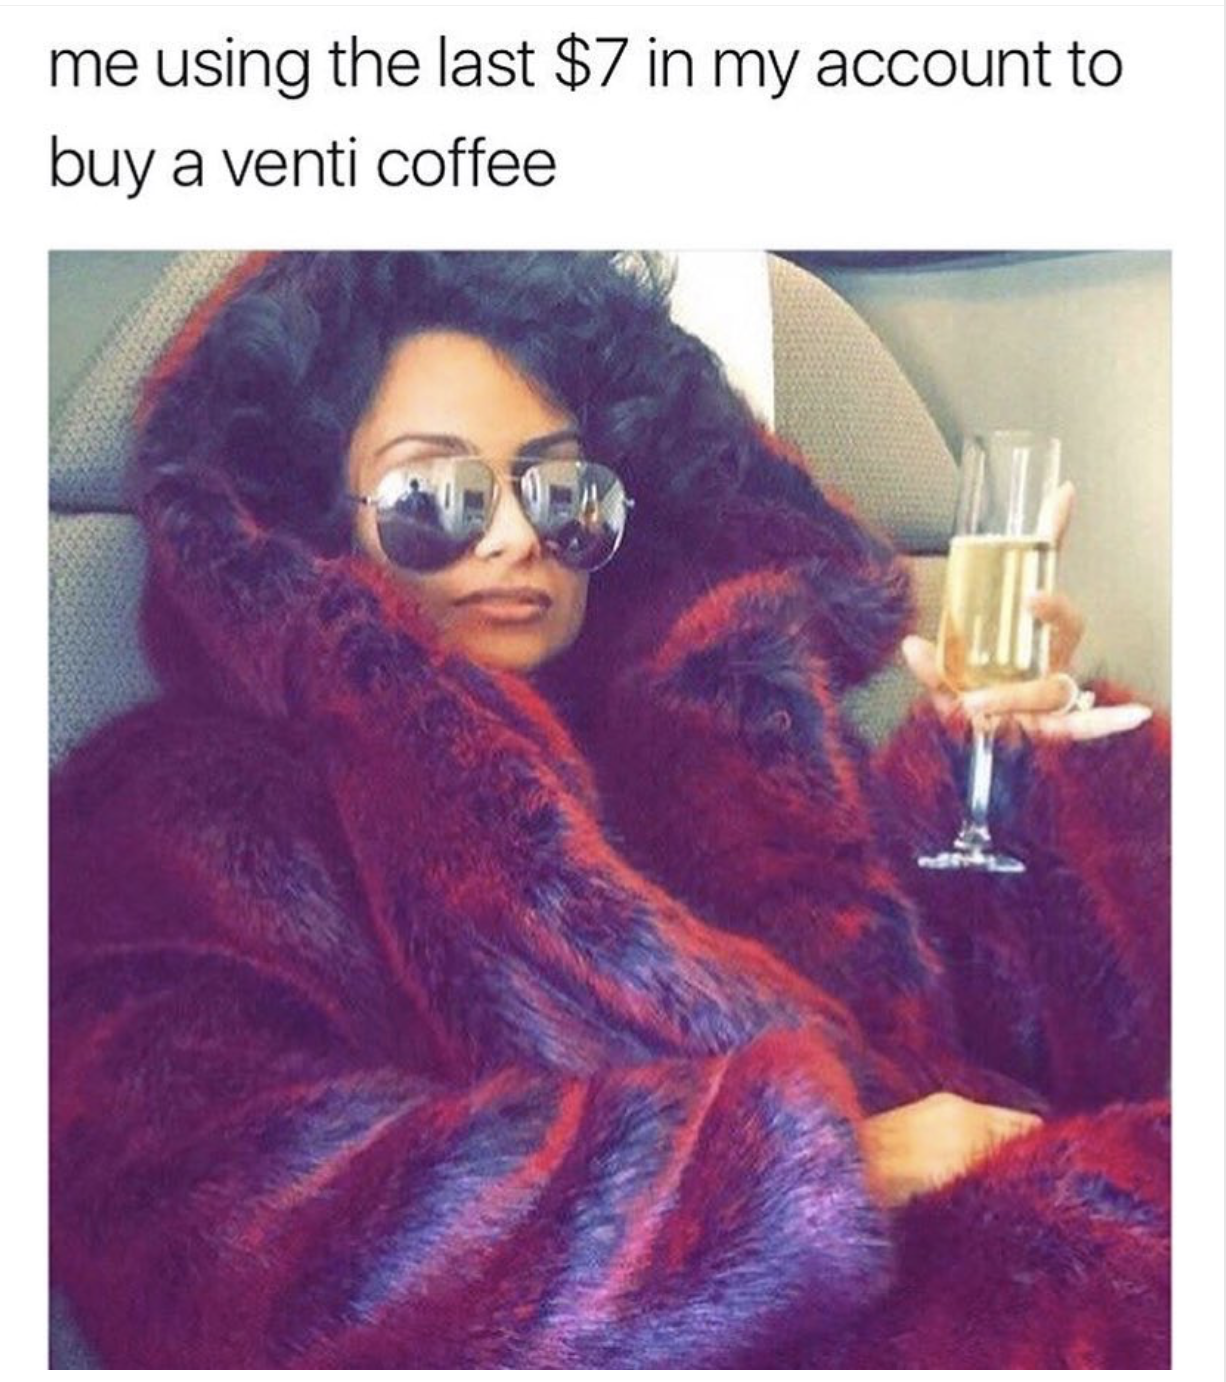 boujee meme - me using the last $7 in my account to buy a venti coffee